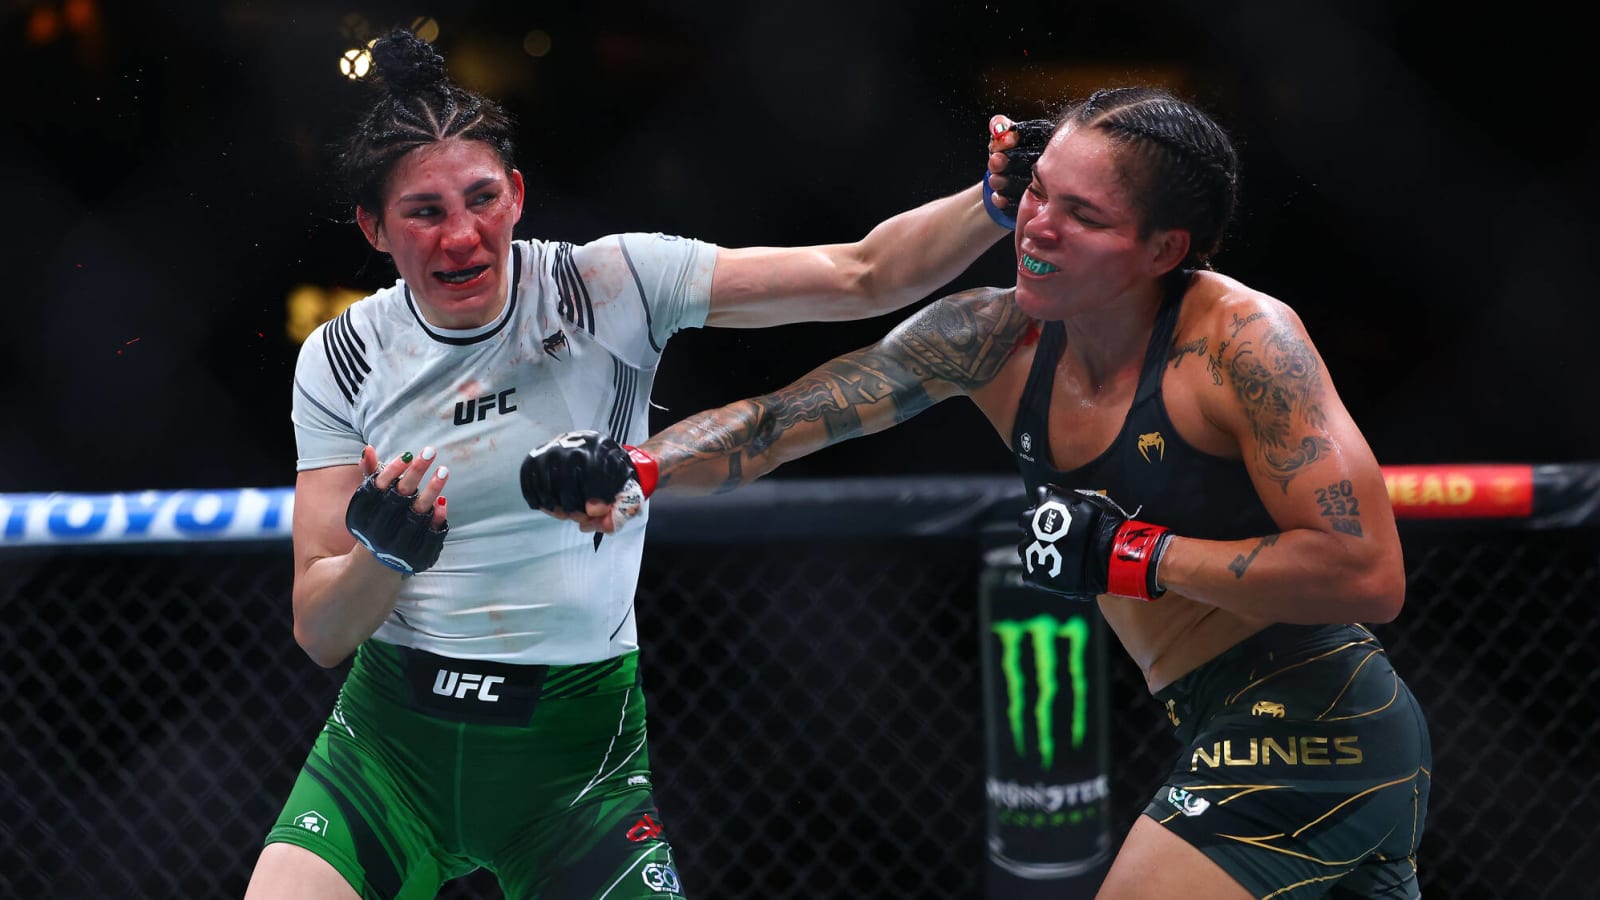 After lackluster performance at UFC 289, what’s next for Irene Aldana?